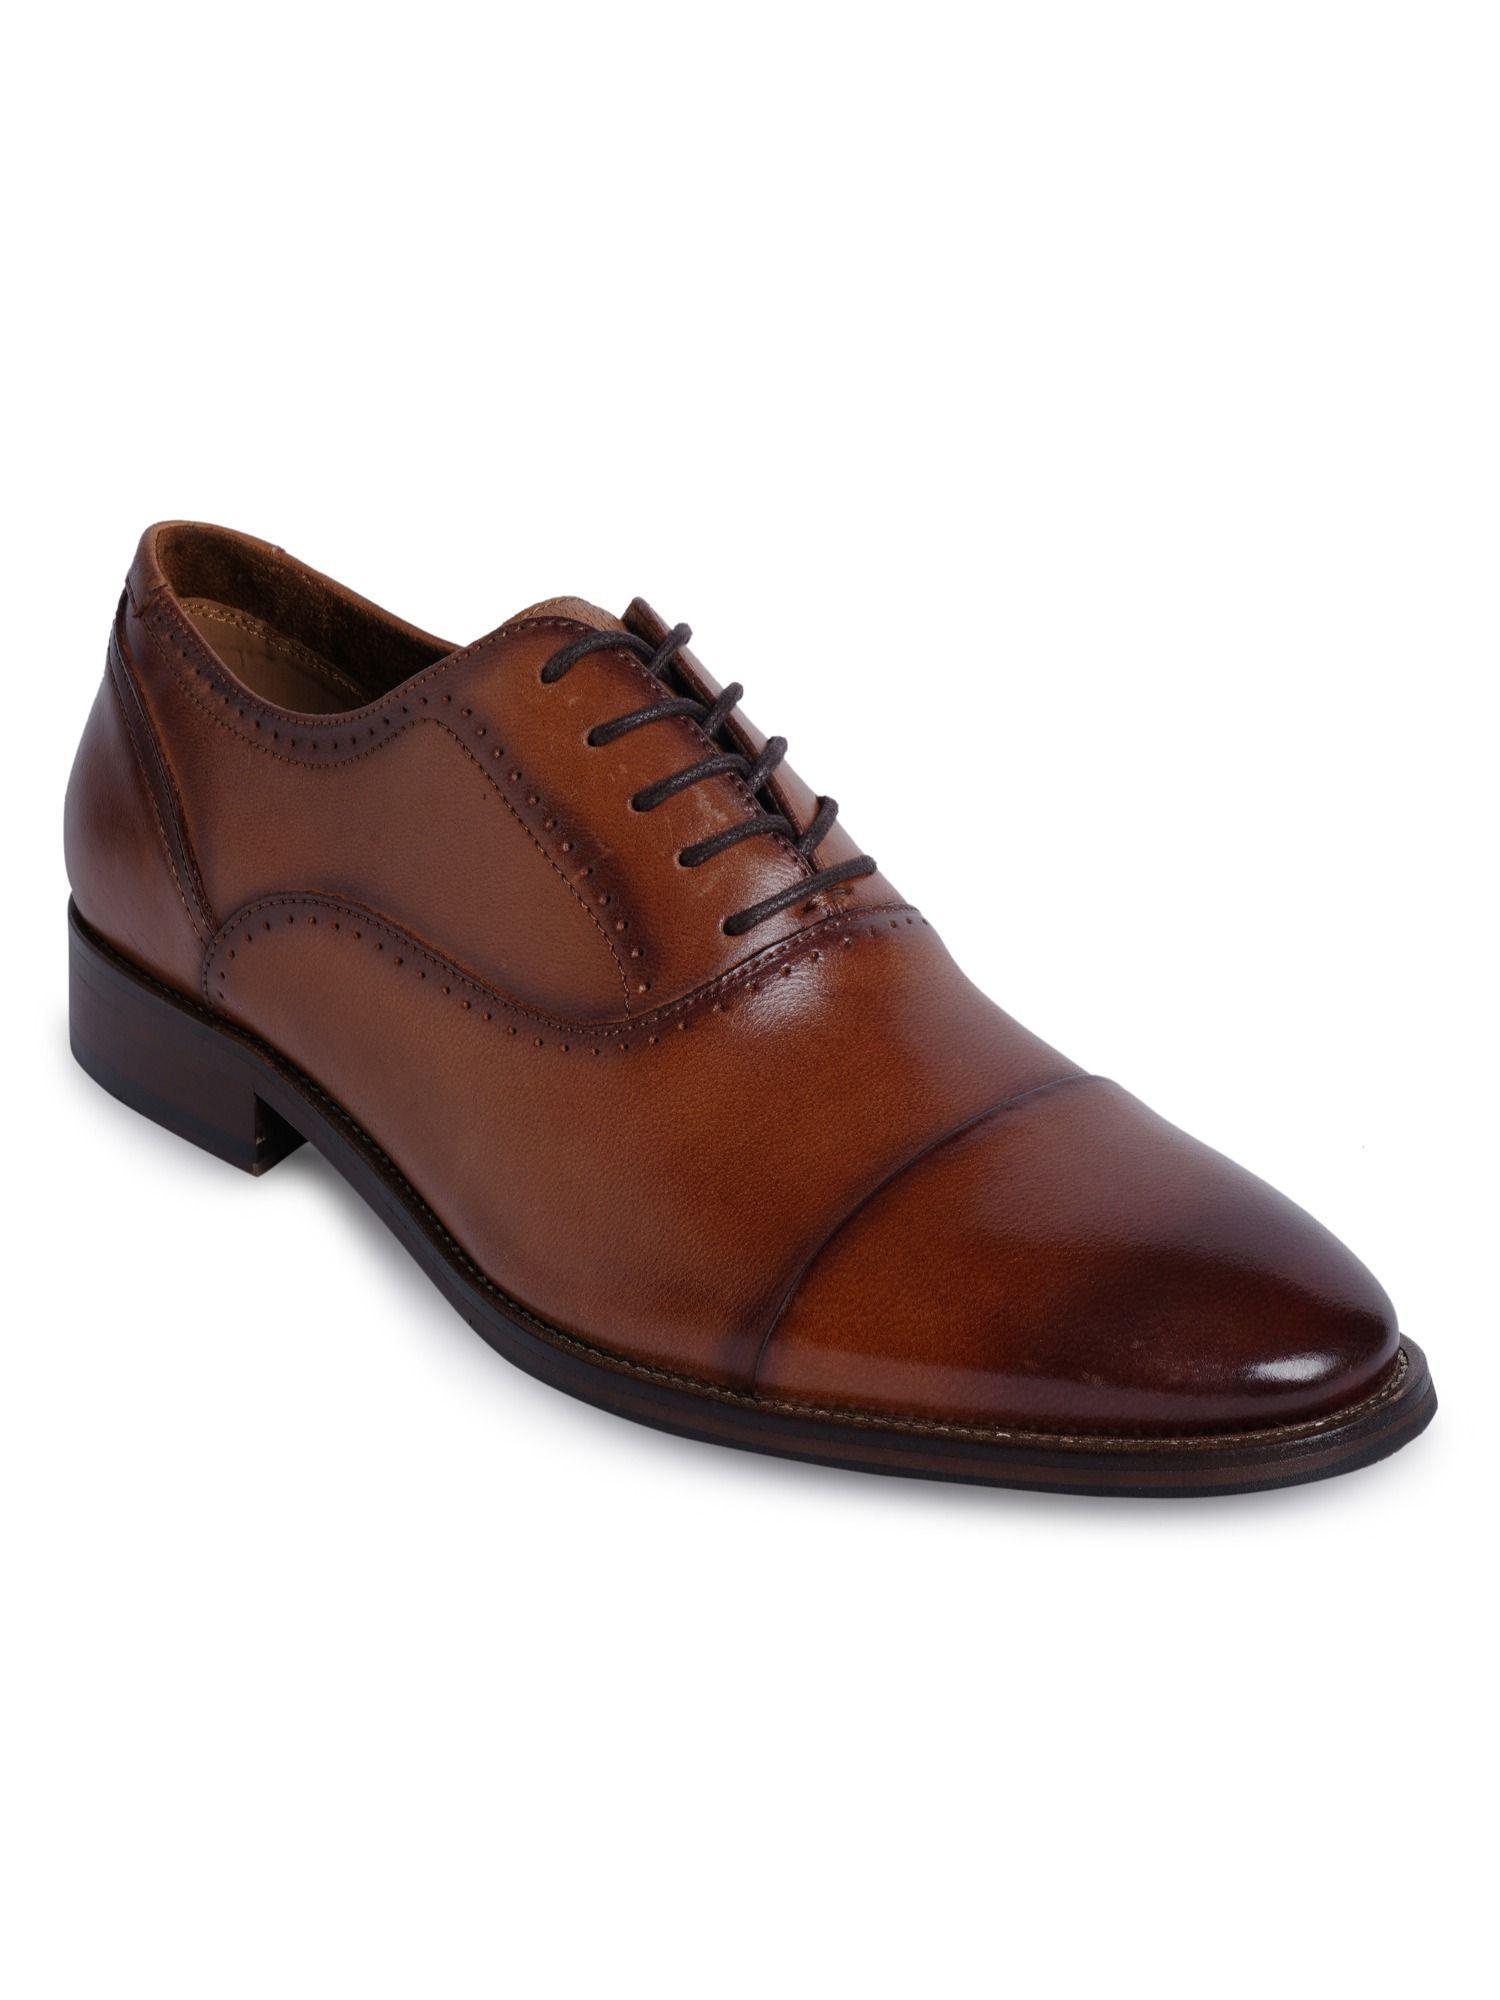 abawienflex leather tan solid formal oxford shoes